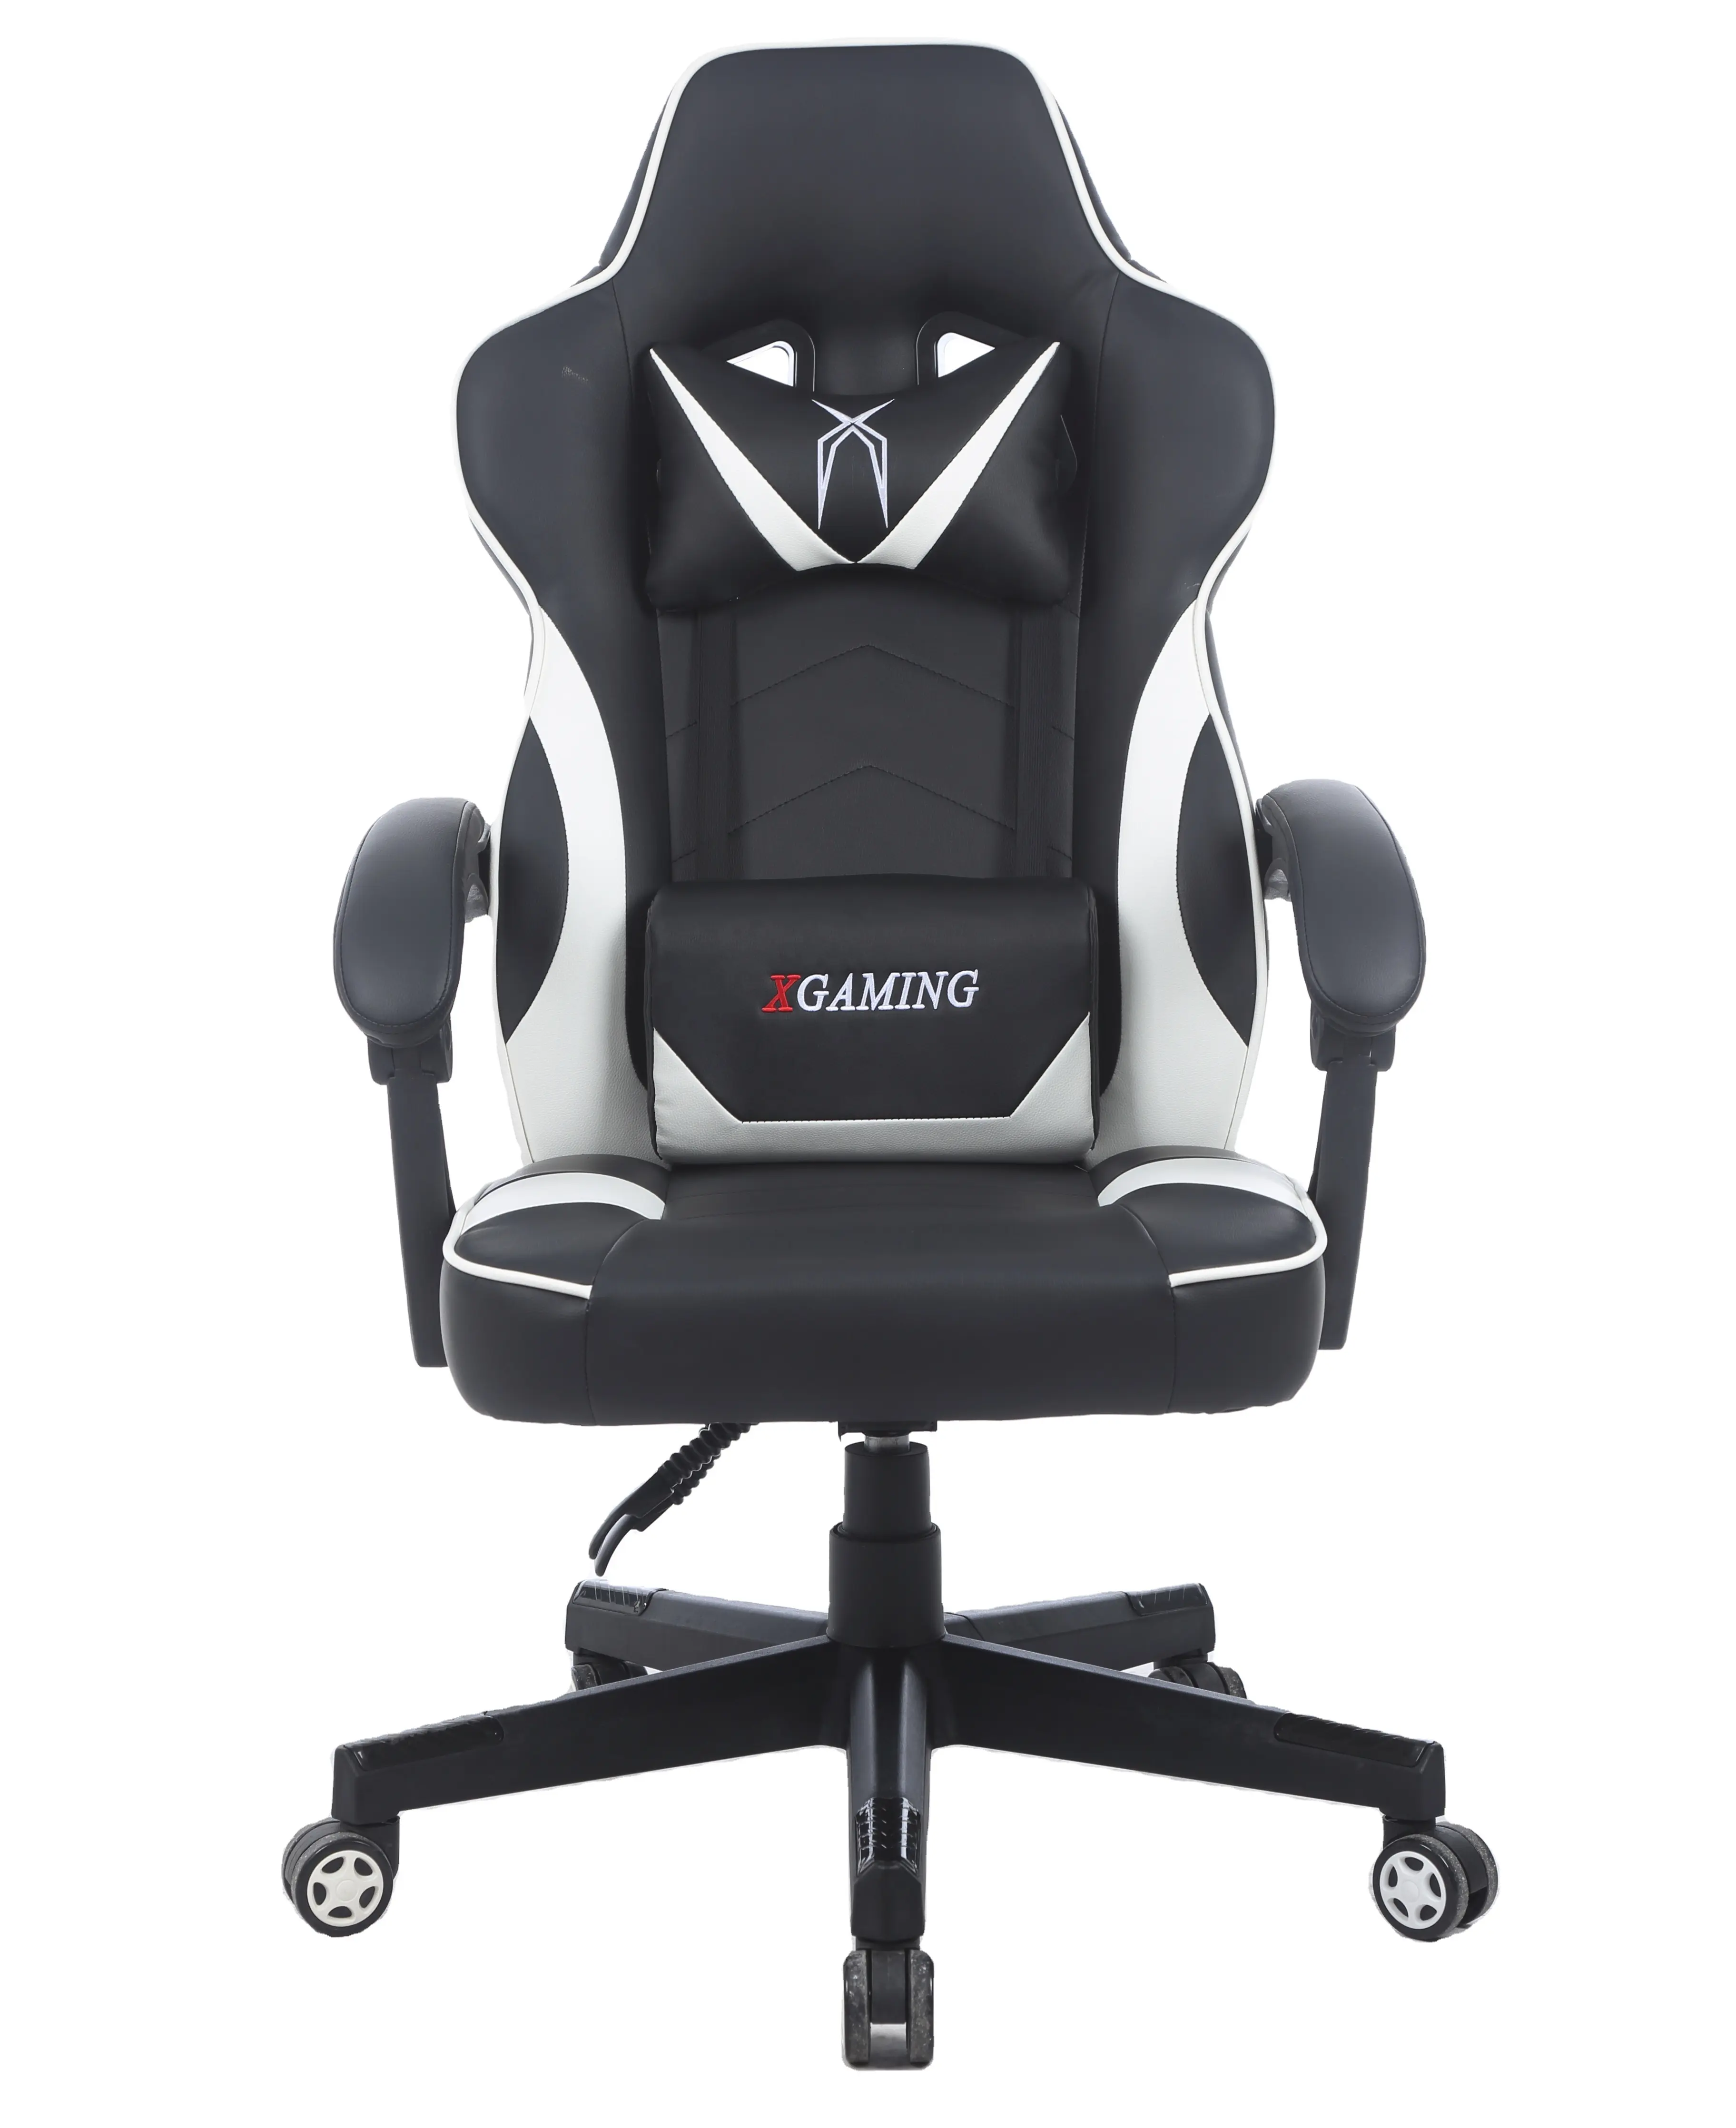 custom color racing leather ergonomic video game chair black reclining gamer chair black gaming chair combination design negro